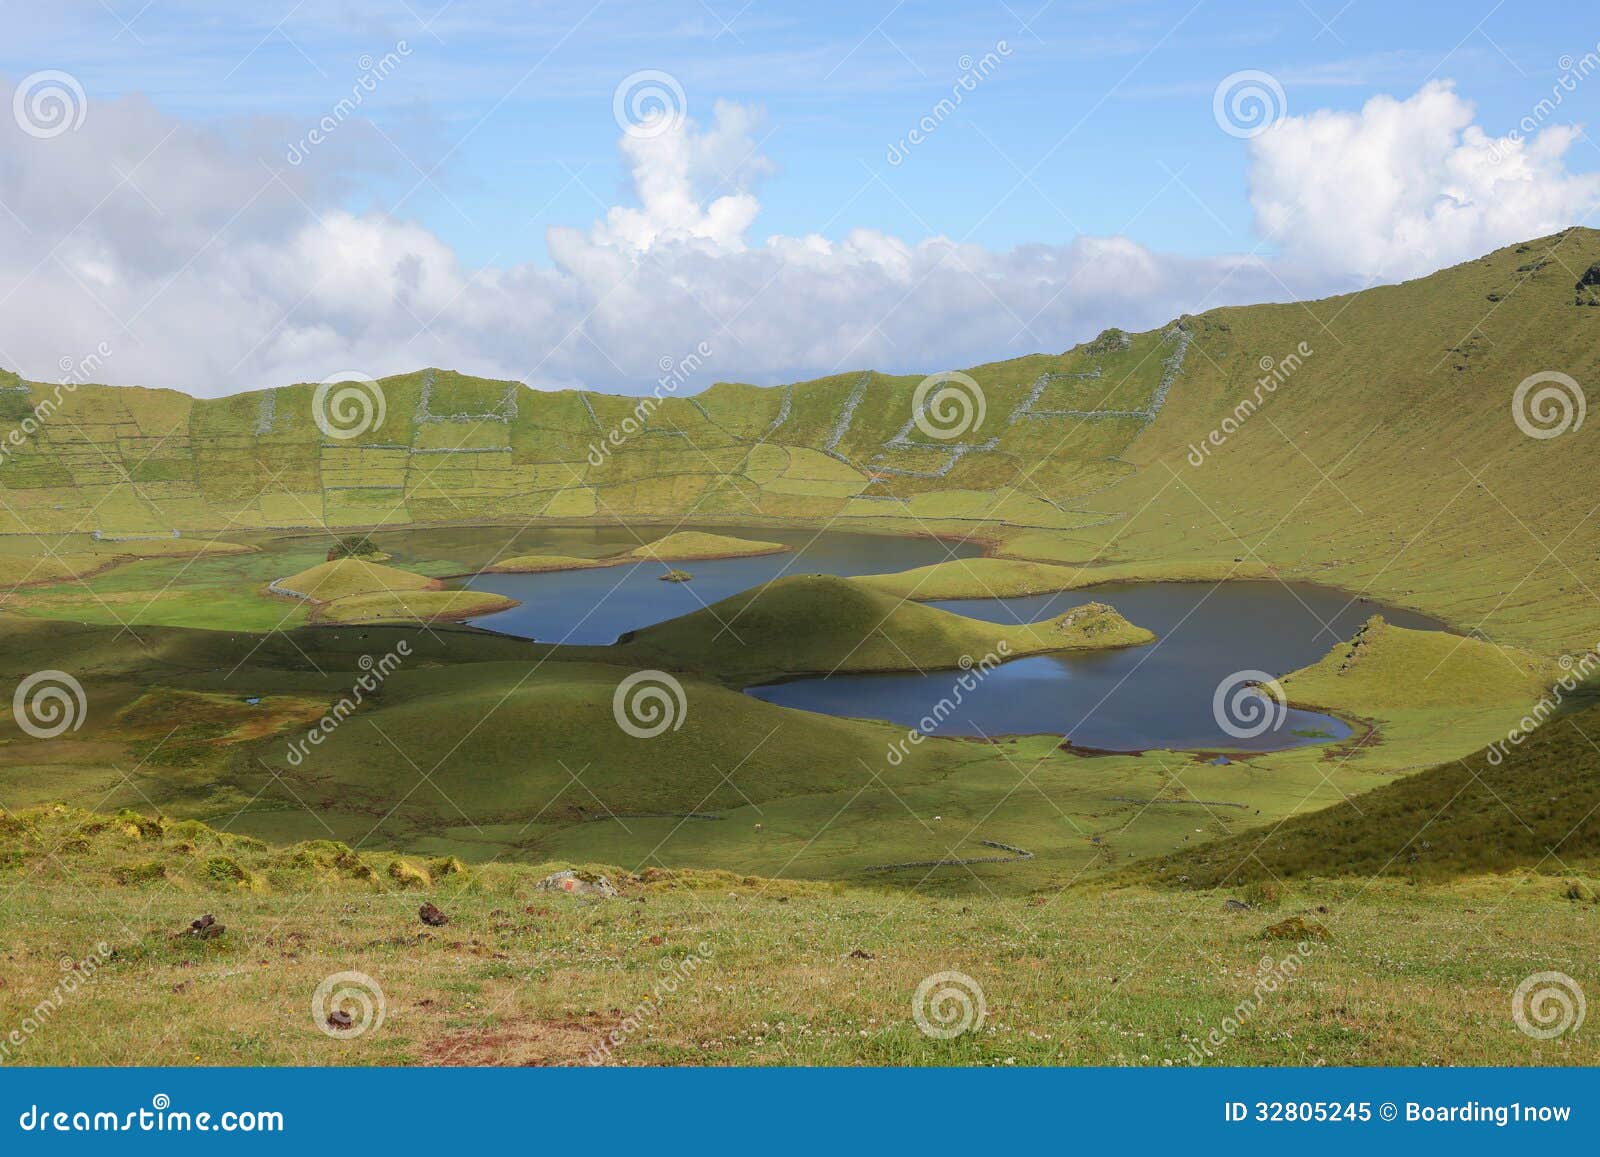 volcano crater on the island of corvo azores portugal